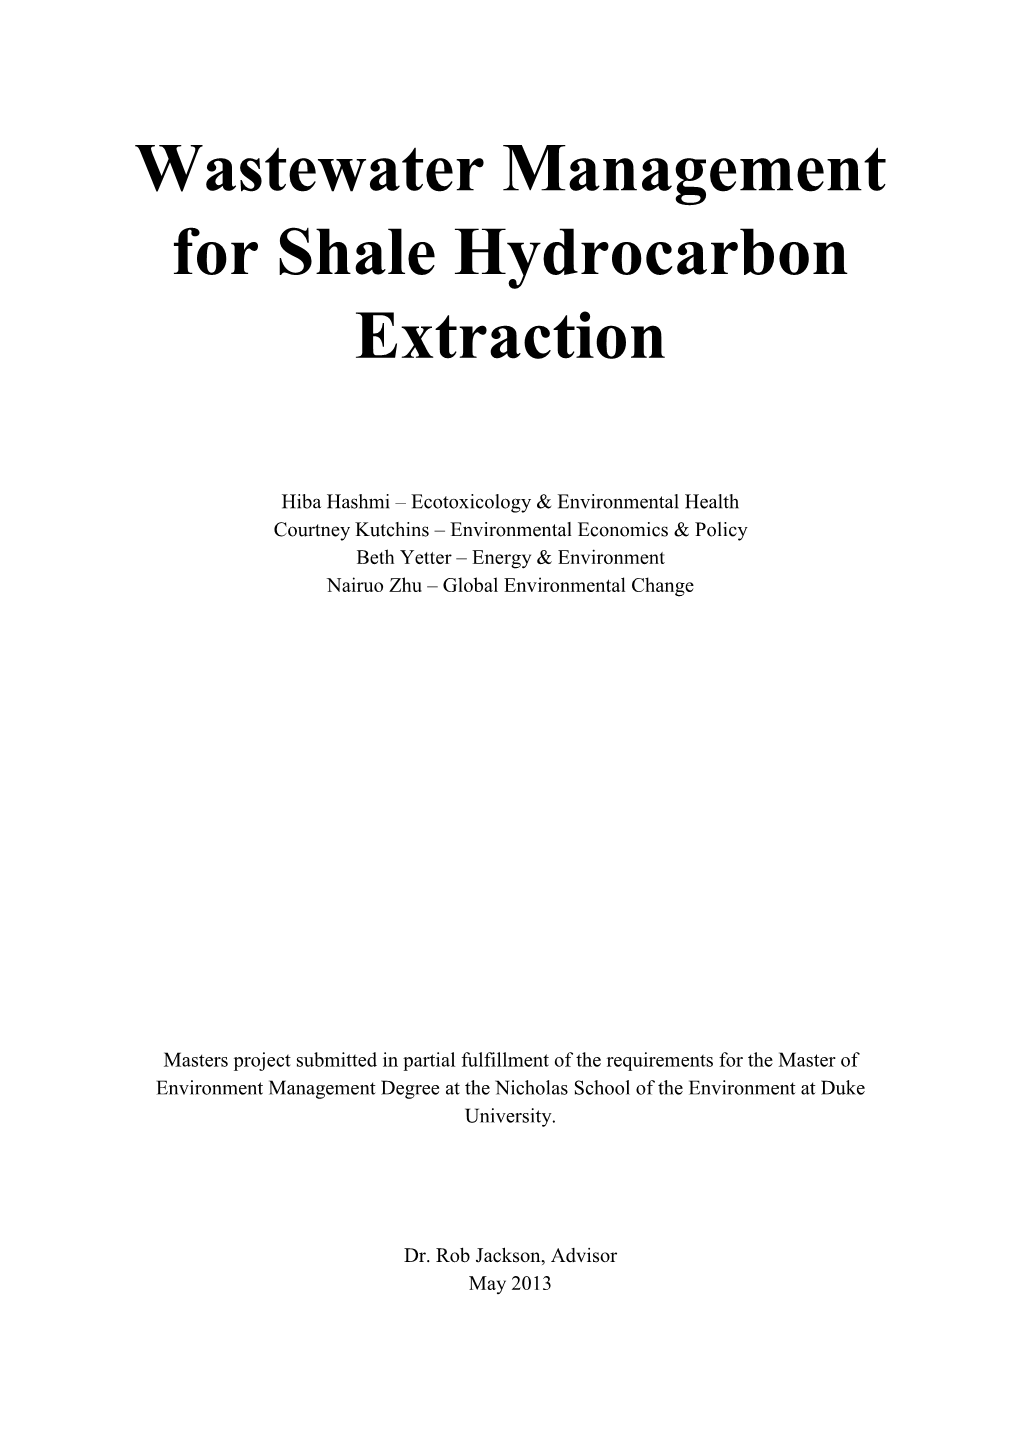 Wastewater Management for Shale Hydrocarbon Extraction